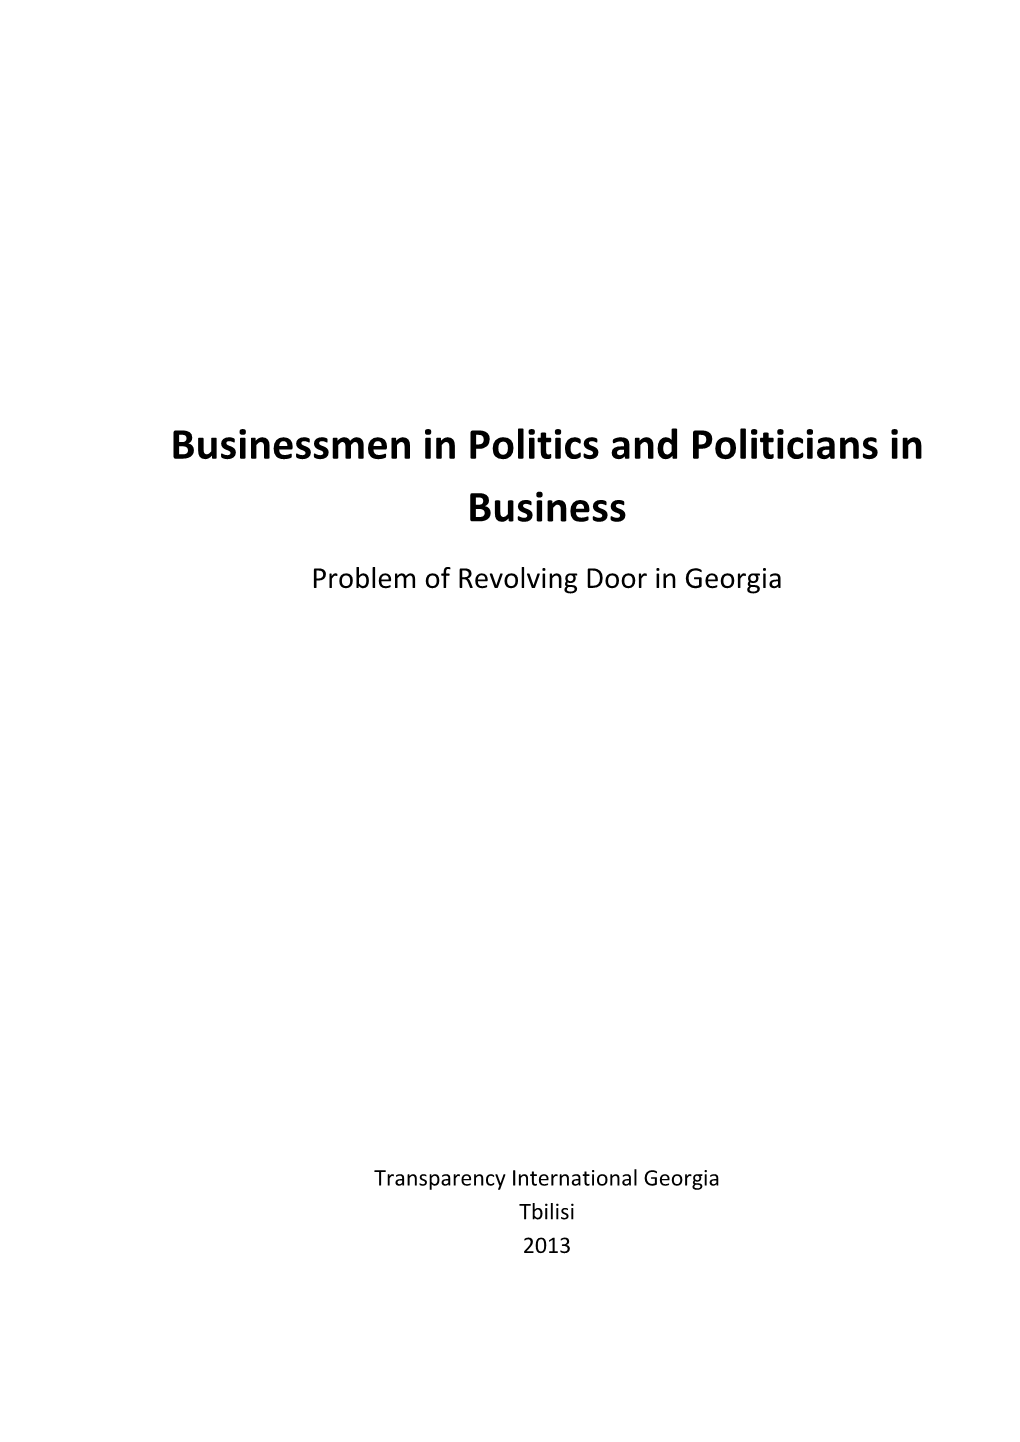 Businessmen in Politics and Politicians in Business